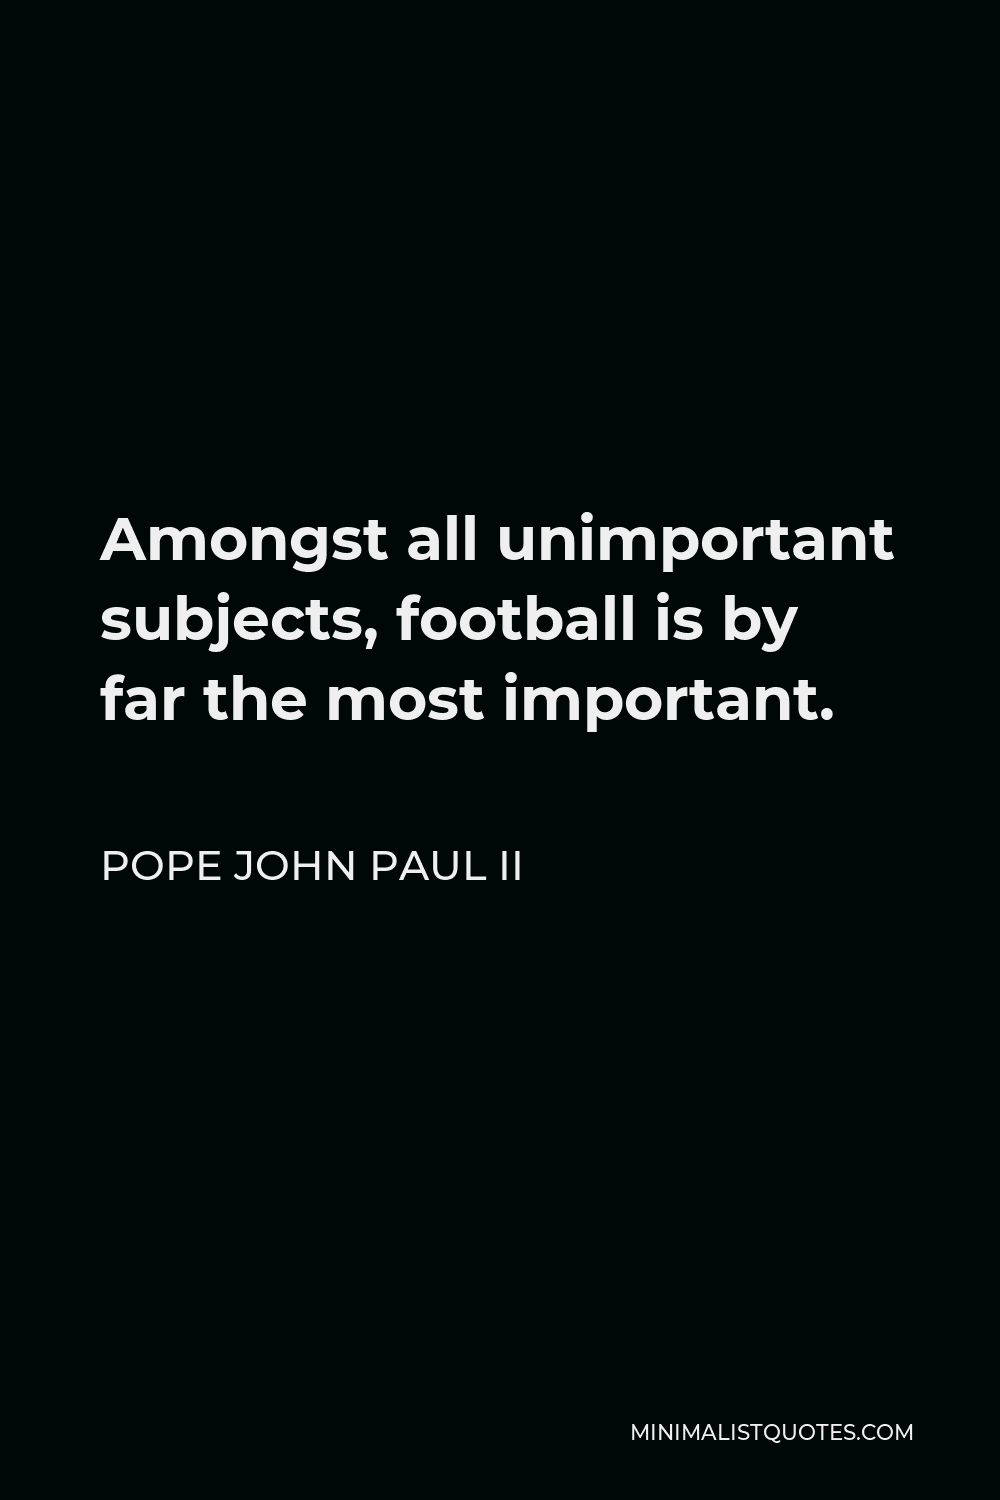 Pope John Paul II Quote - Amongst all unimportant subjects, football is by far the most important.